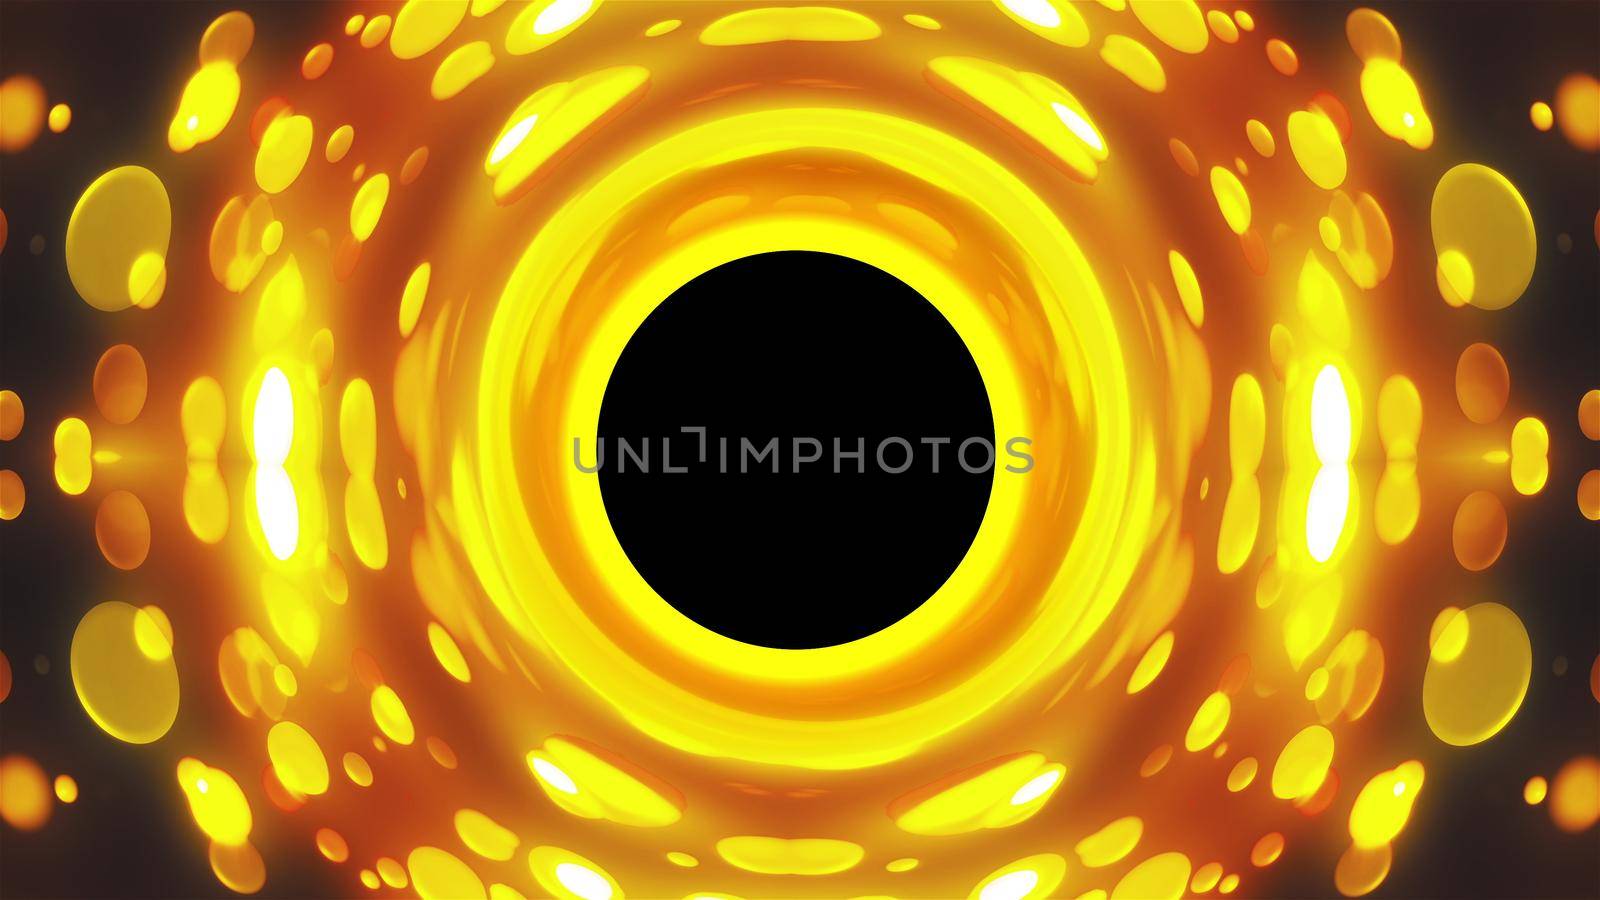 Black hole with gold backdrop by nolimit046